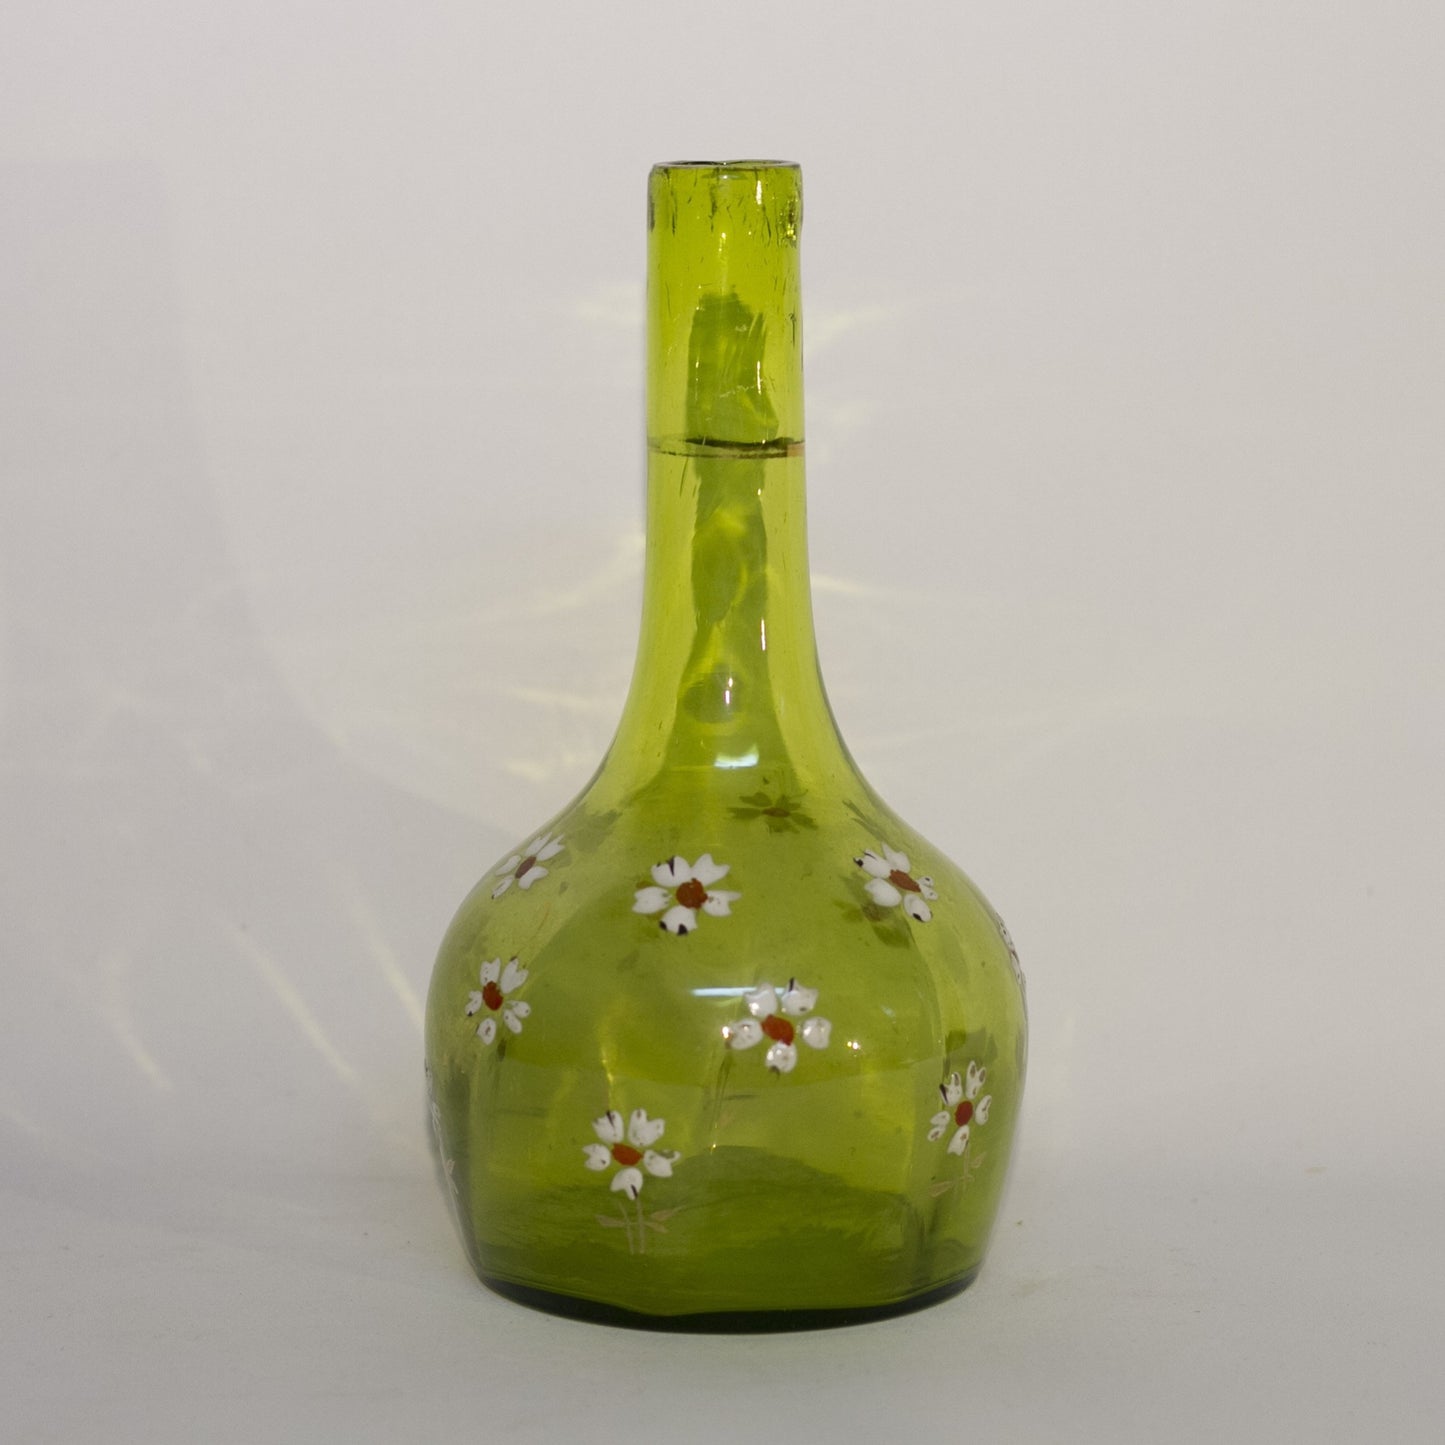 VICTORIAN ENAMELED BARBER BOTTLE Apple Green Colored Glass with Gold Gilt and Hand Painted White Enamel Daisies Circa 1880-1910